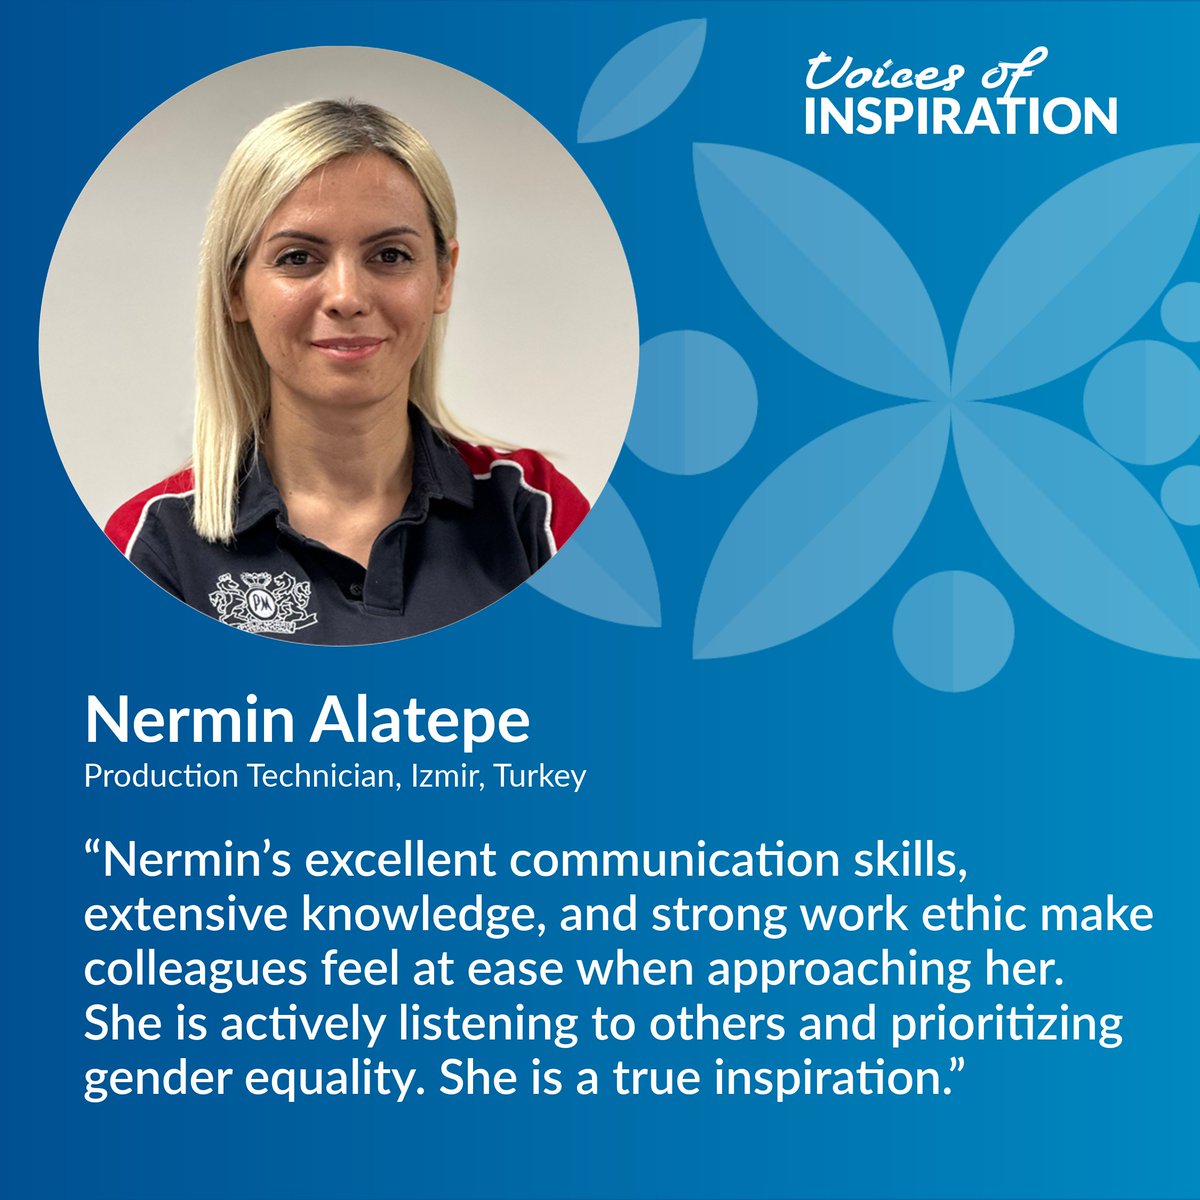 To continue our Voices of Inspiration campaign, meet some of our inspiring nominees and find out why employees chose them.  

Meet Nermin Alatepe, PMI's Production Technician in Turkey ⬇️ 

 #InvestInWomen #InspireInclusion